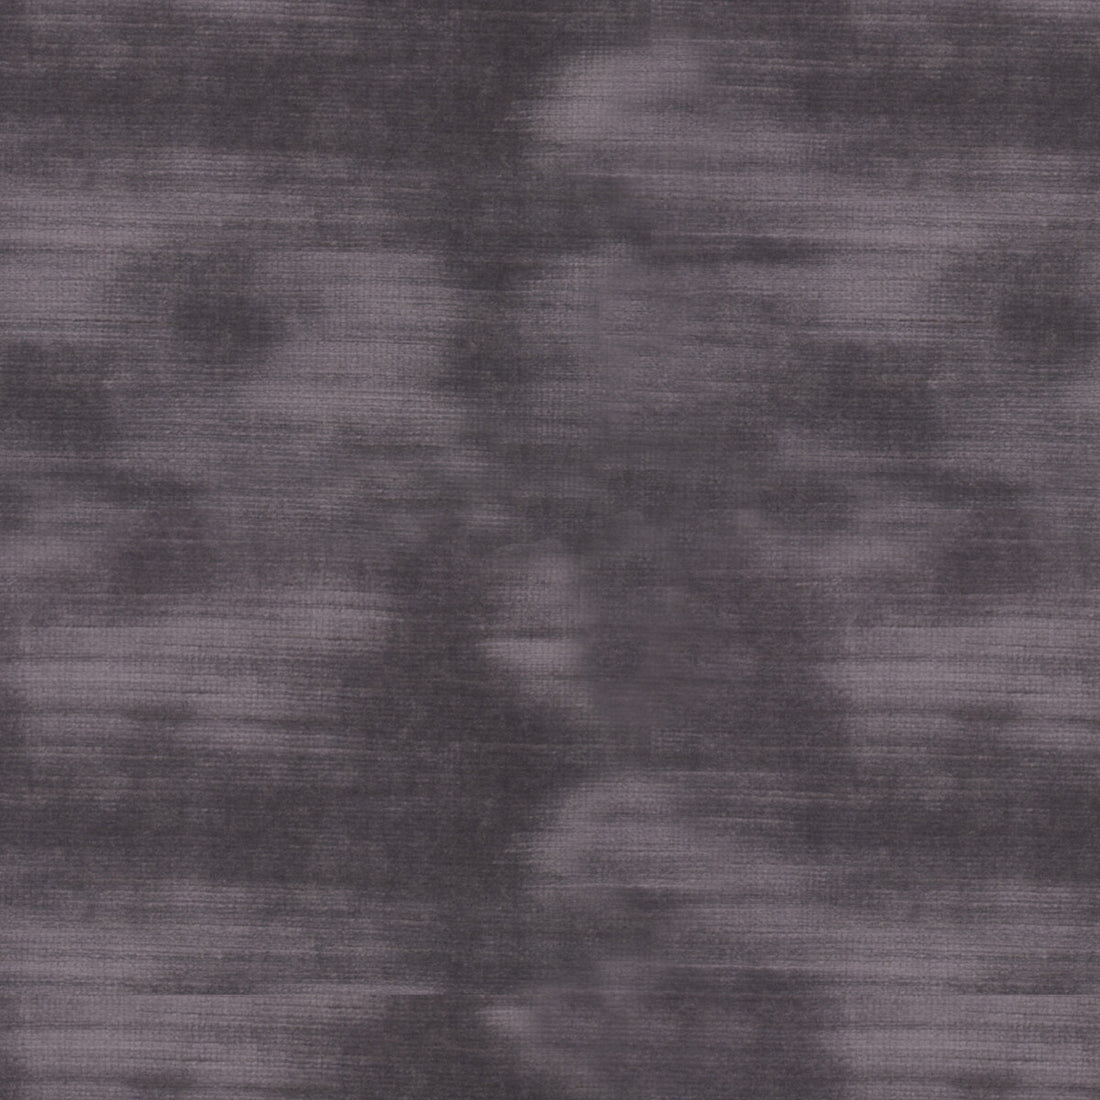 High Impact fabric in graphite color - pattern 34329.1121.0 - by Kravet Couture